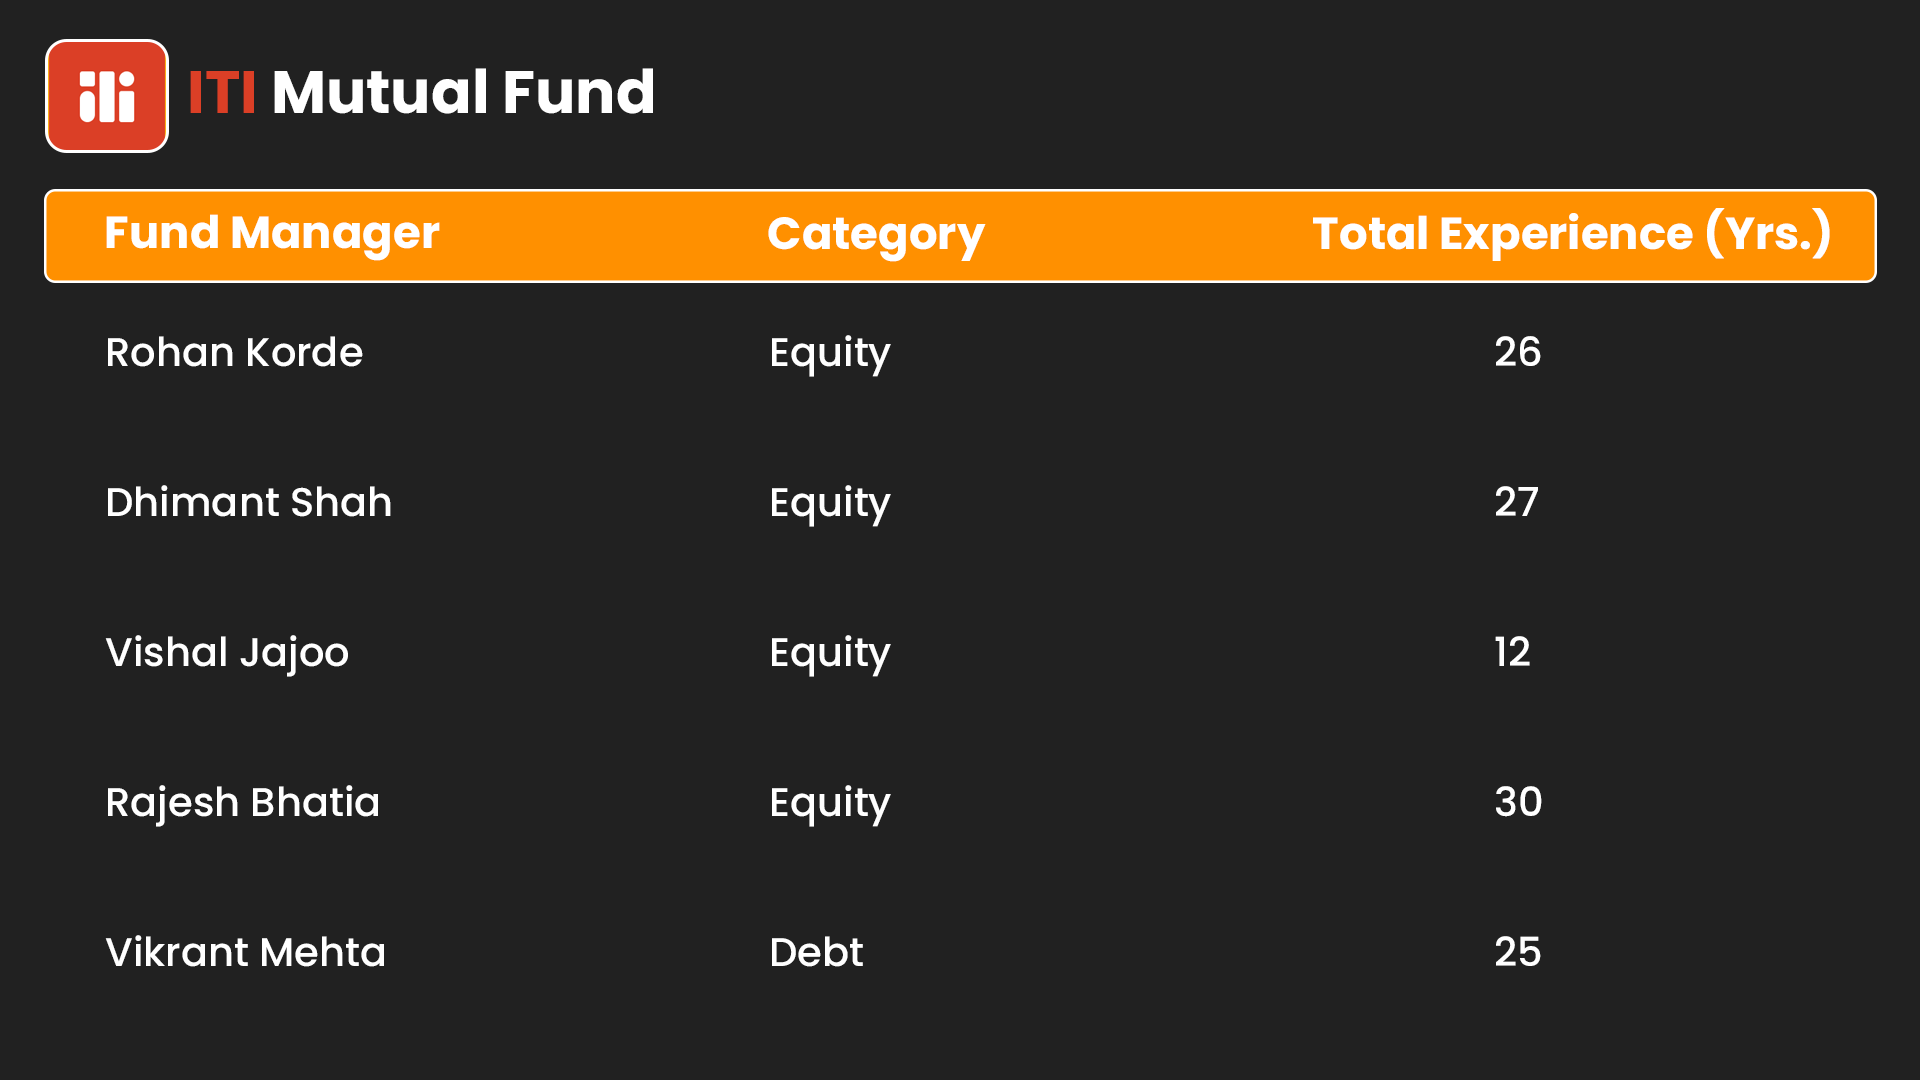 List of Fund Managers ITI Mutual Fund